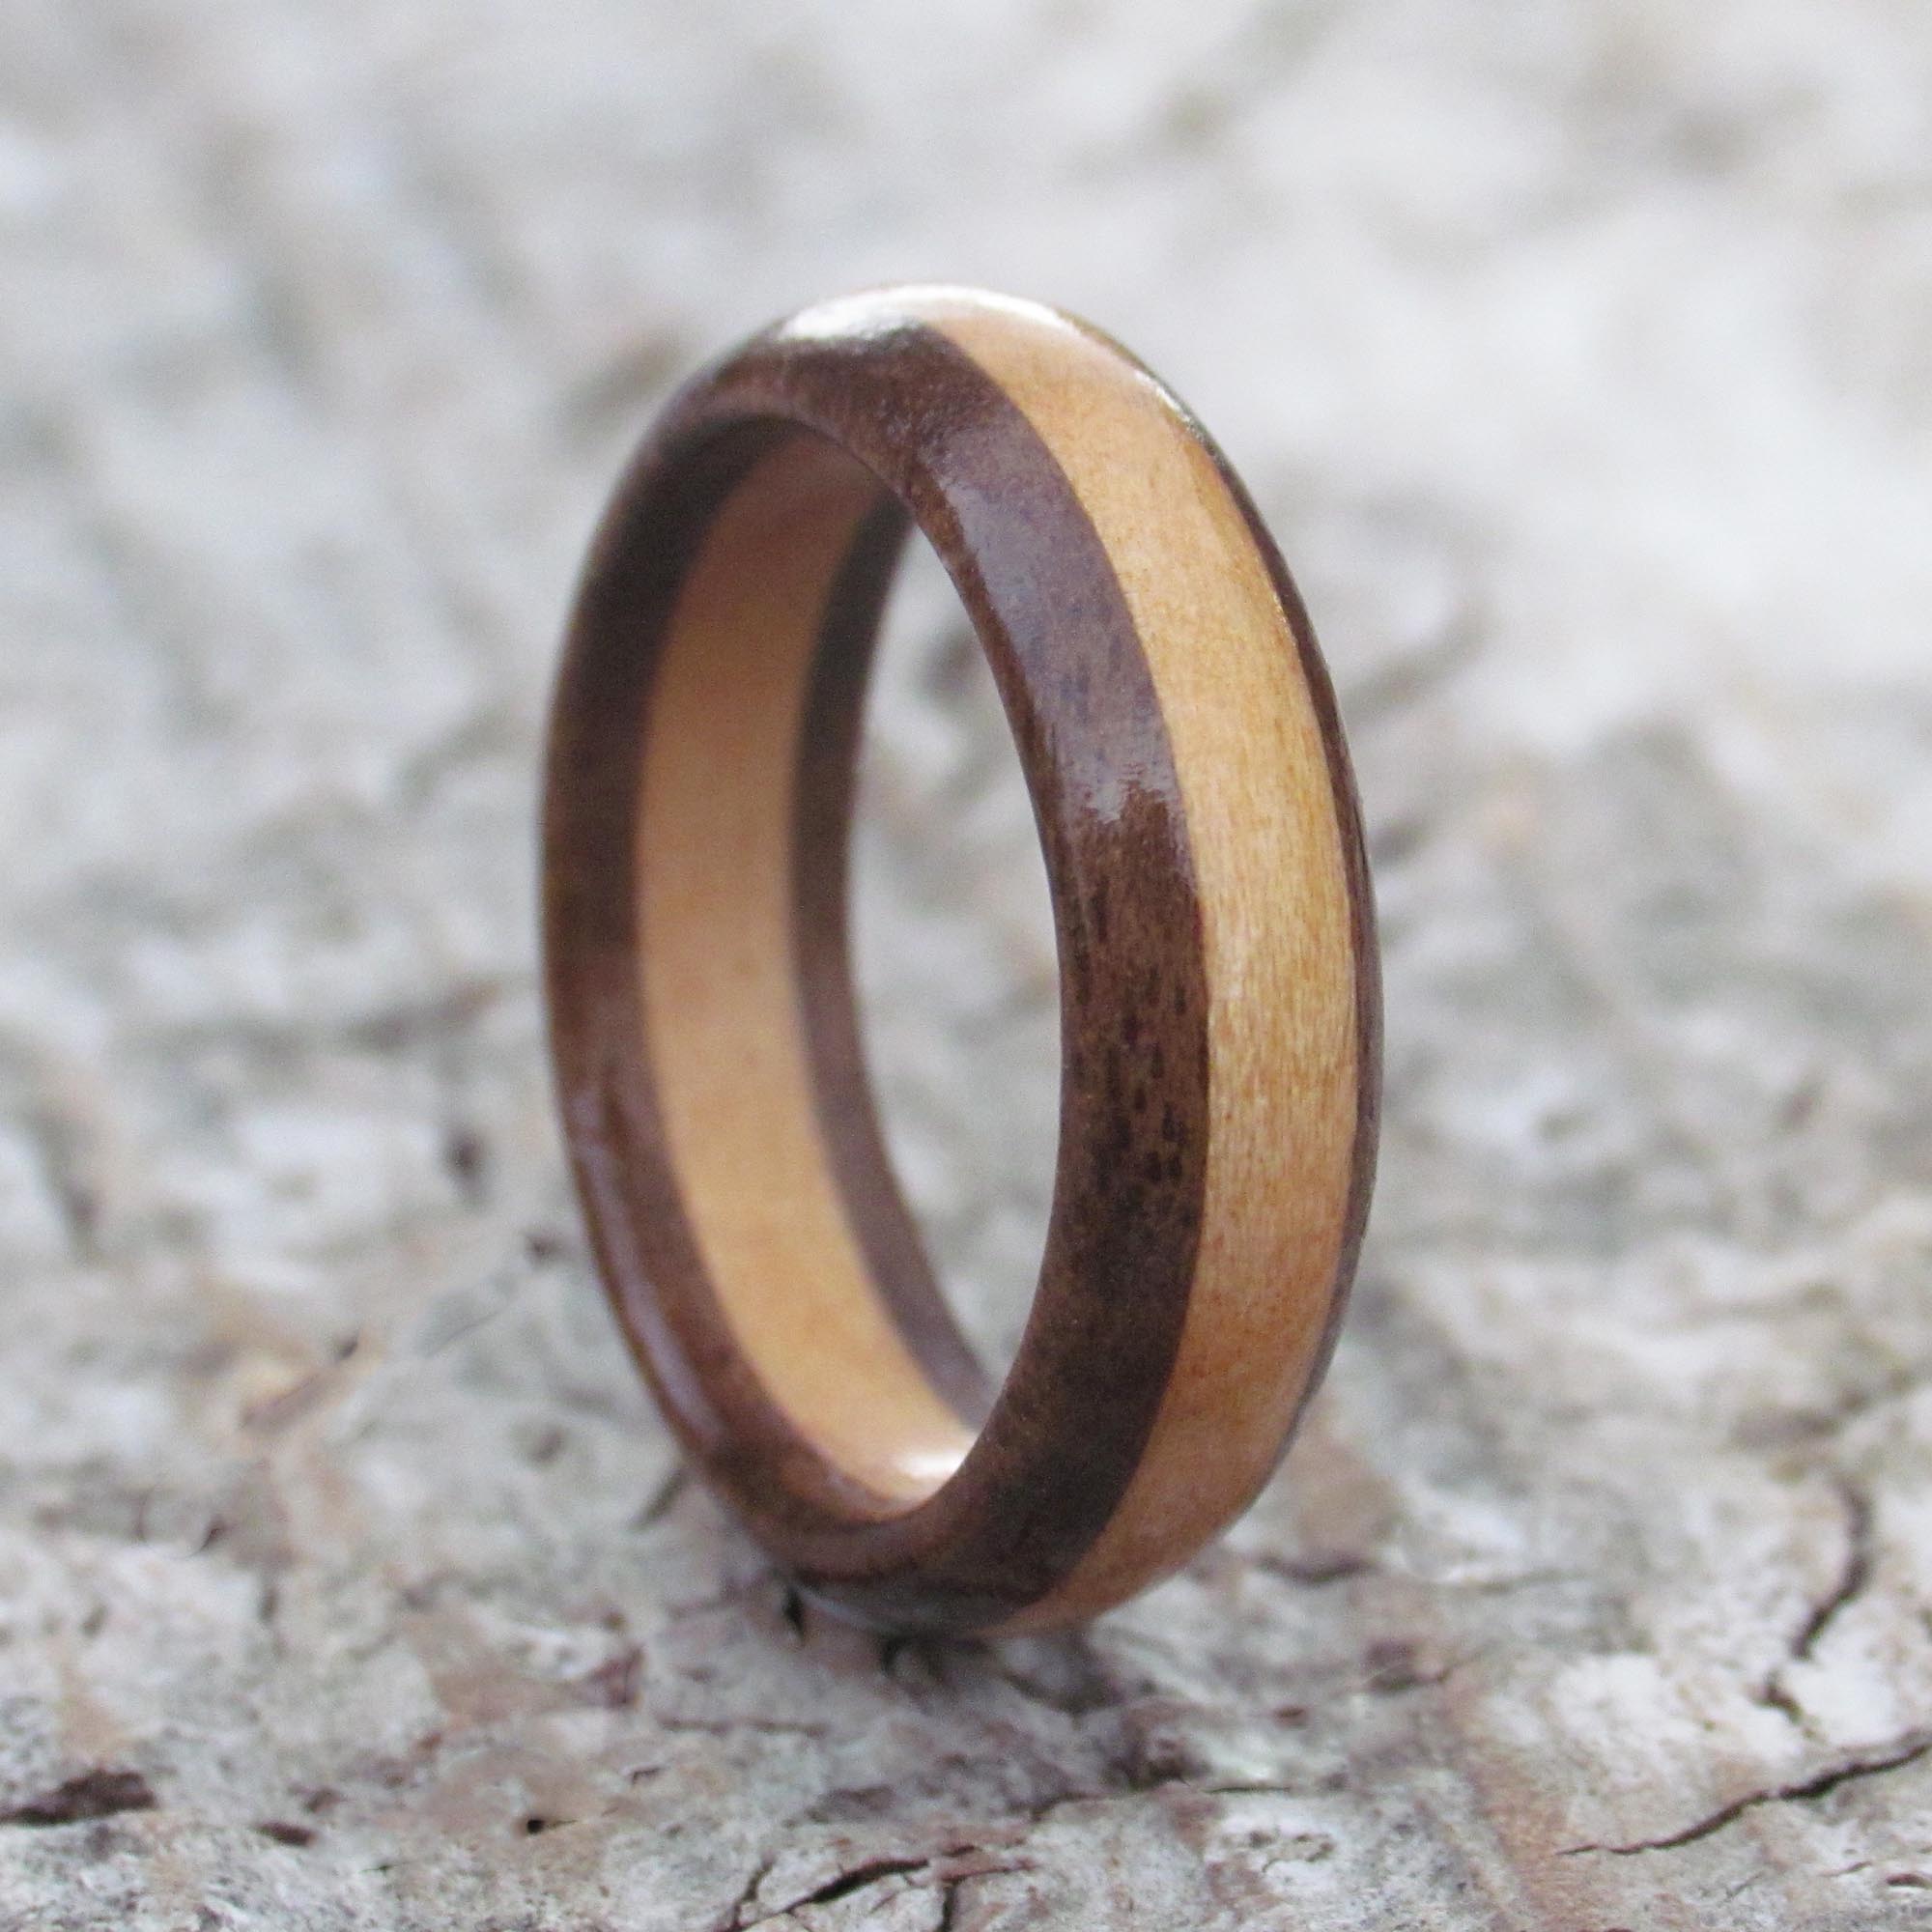 Handcrafted Wooden Rings — The Wood Hut - Beautifully Handcrafted ...